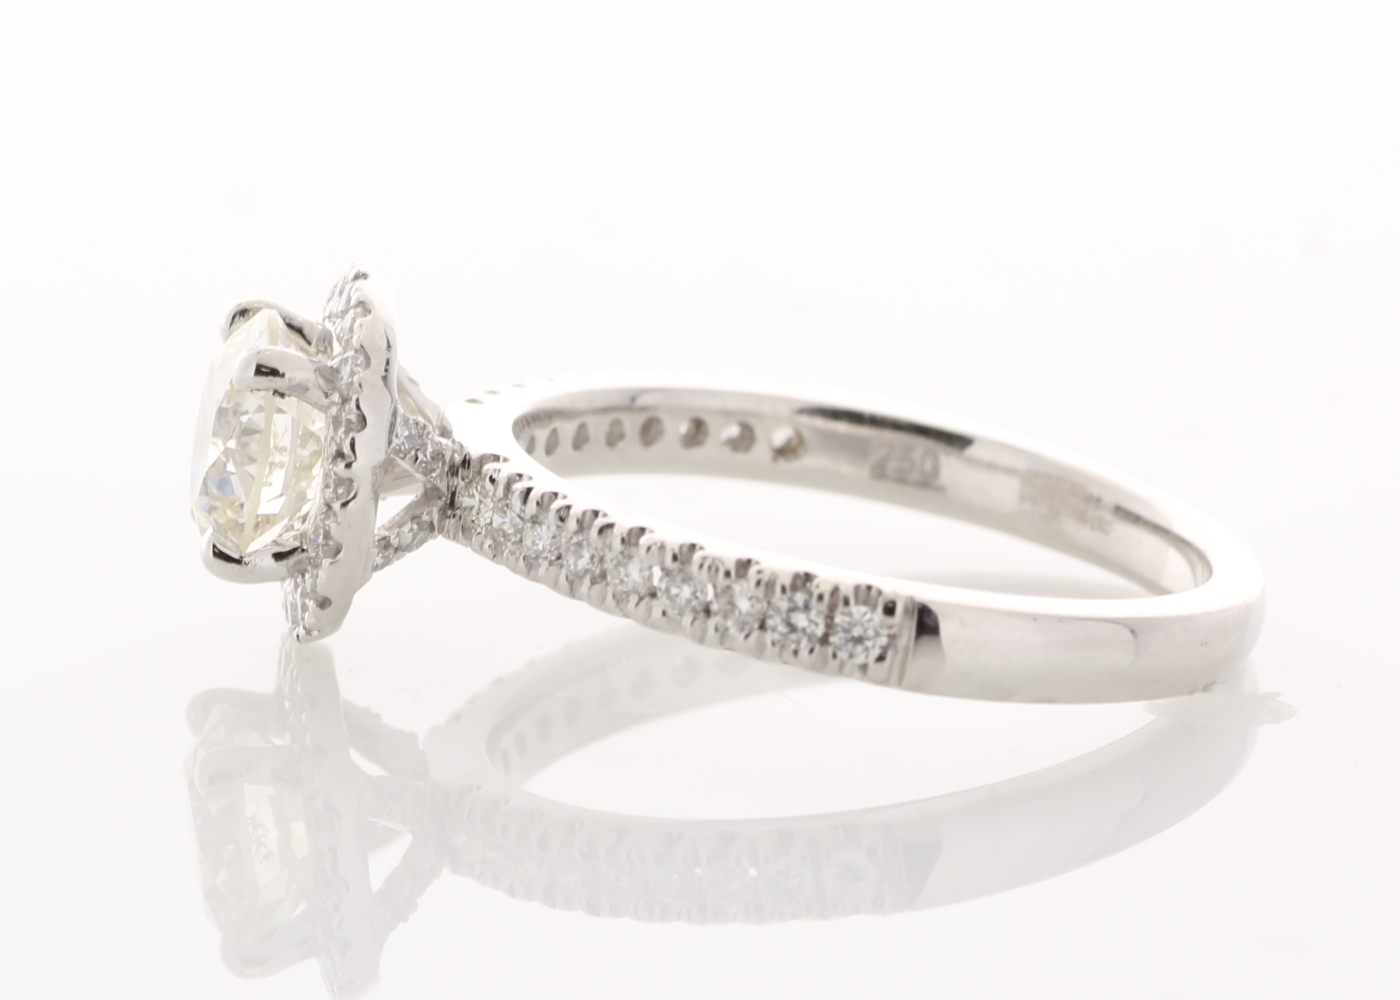 18ct White Gold Single Stone With Halo Setting Ring (1.01) 1.37 Carats - Valued By IDI £32,370. - Image 2 of 5